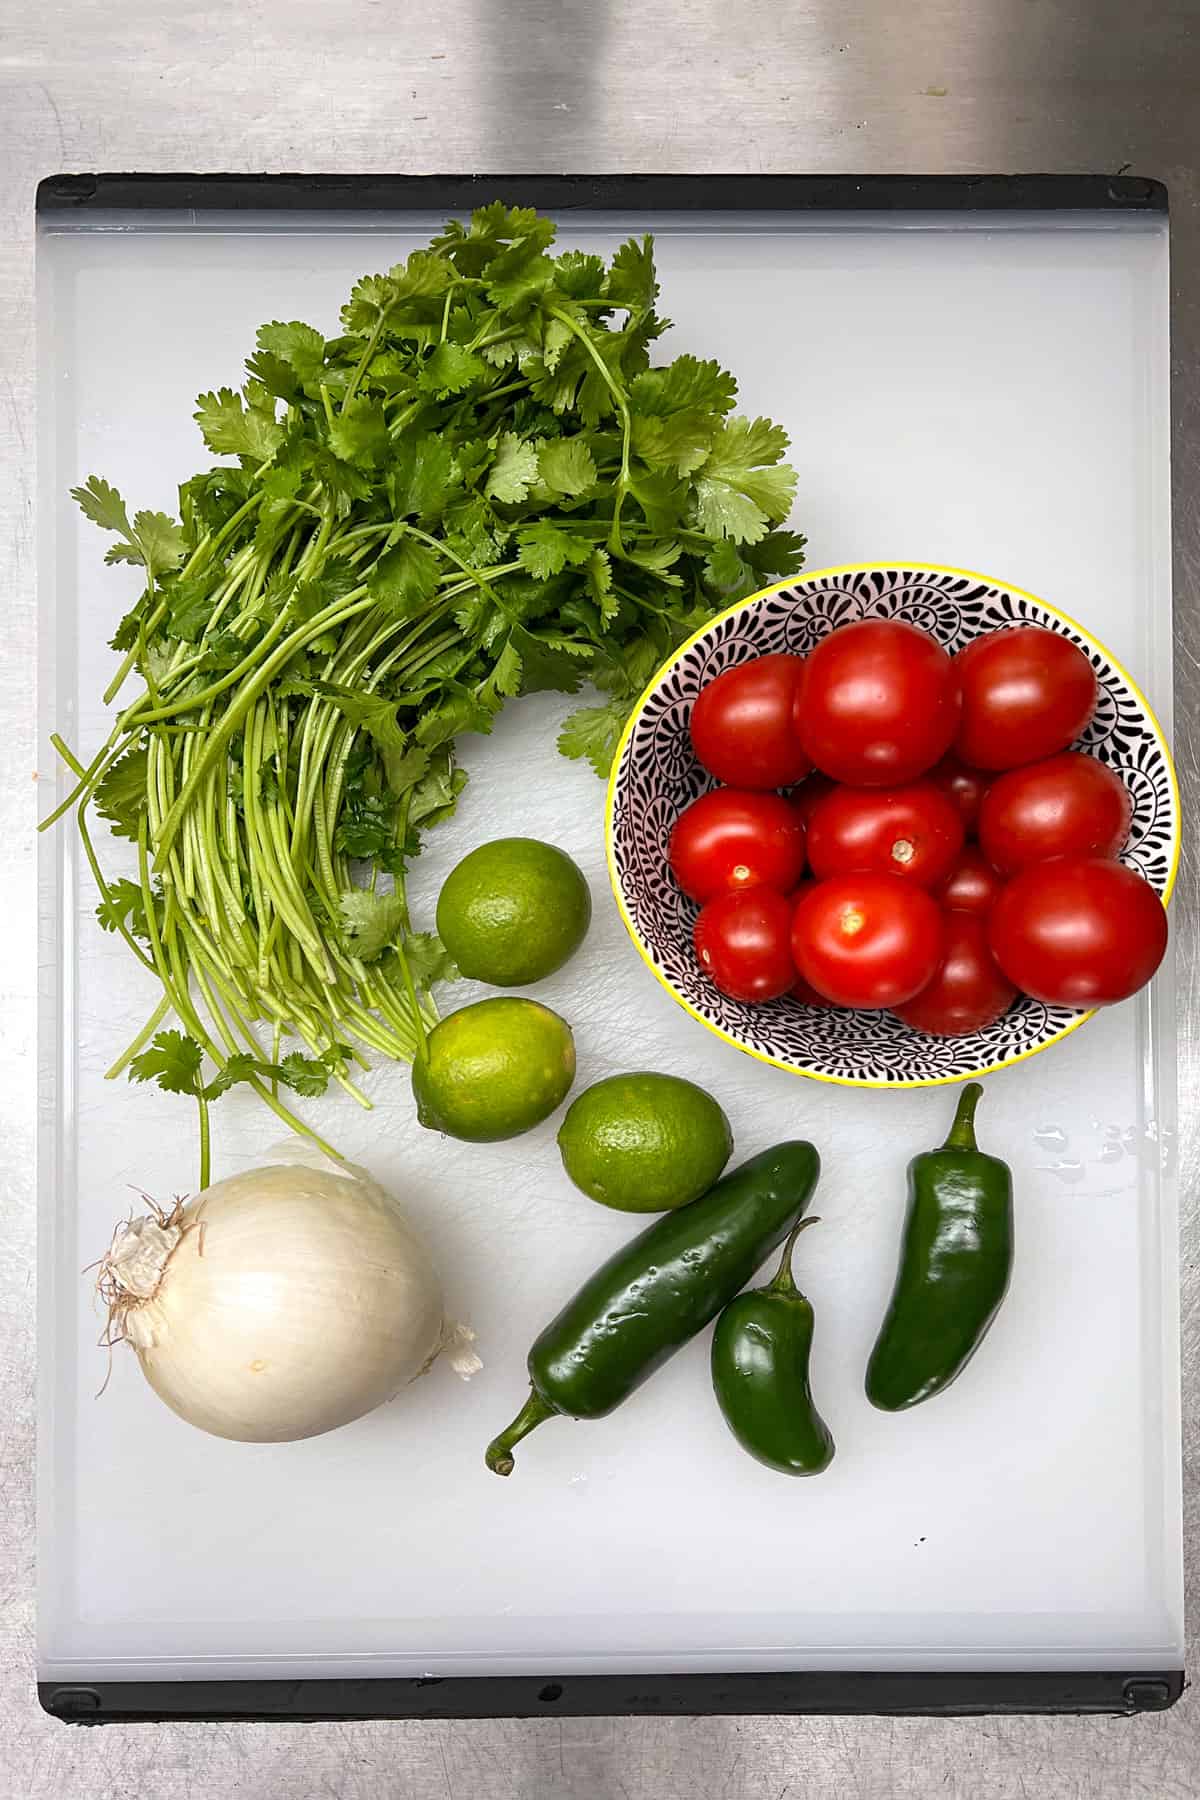 Salsa fresca recipe ingredients on a white cutting board: a bunch of cilantro, a bowl of ripe tomatoes, a white ohnion, 3 jalepeno peppers and 3 limes.